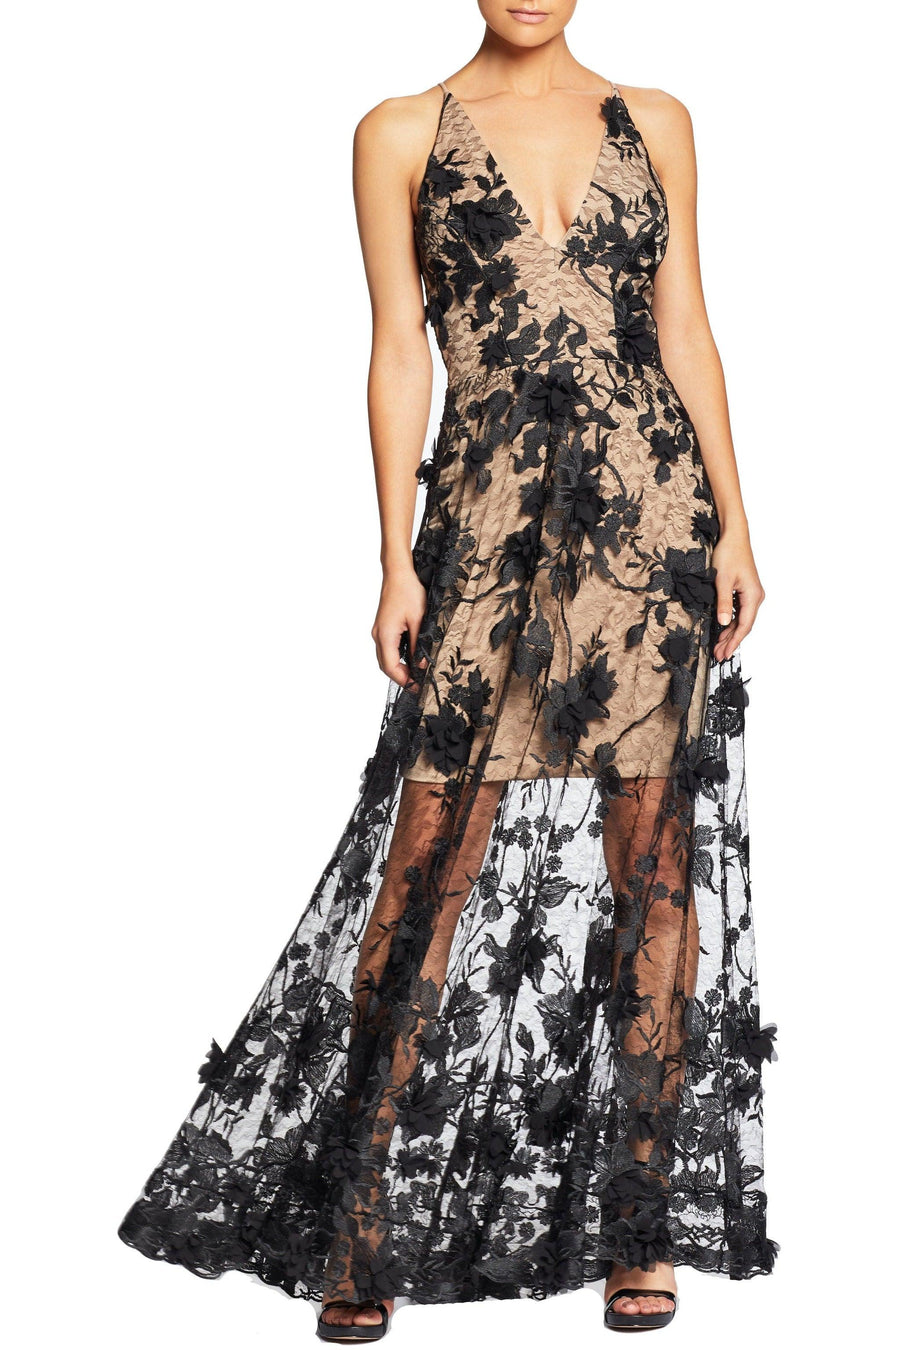 Sidney Gown / BLACK/NUDE